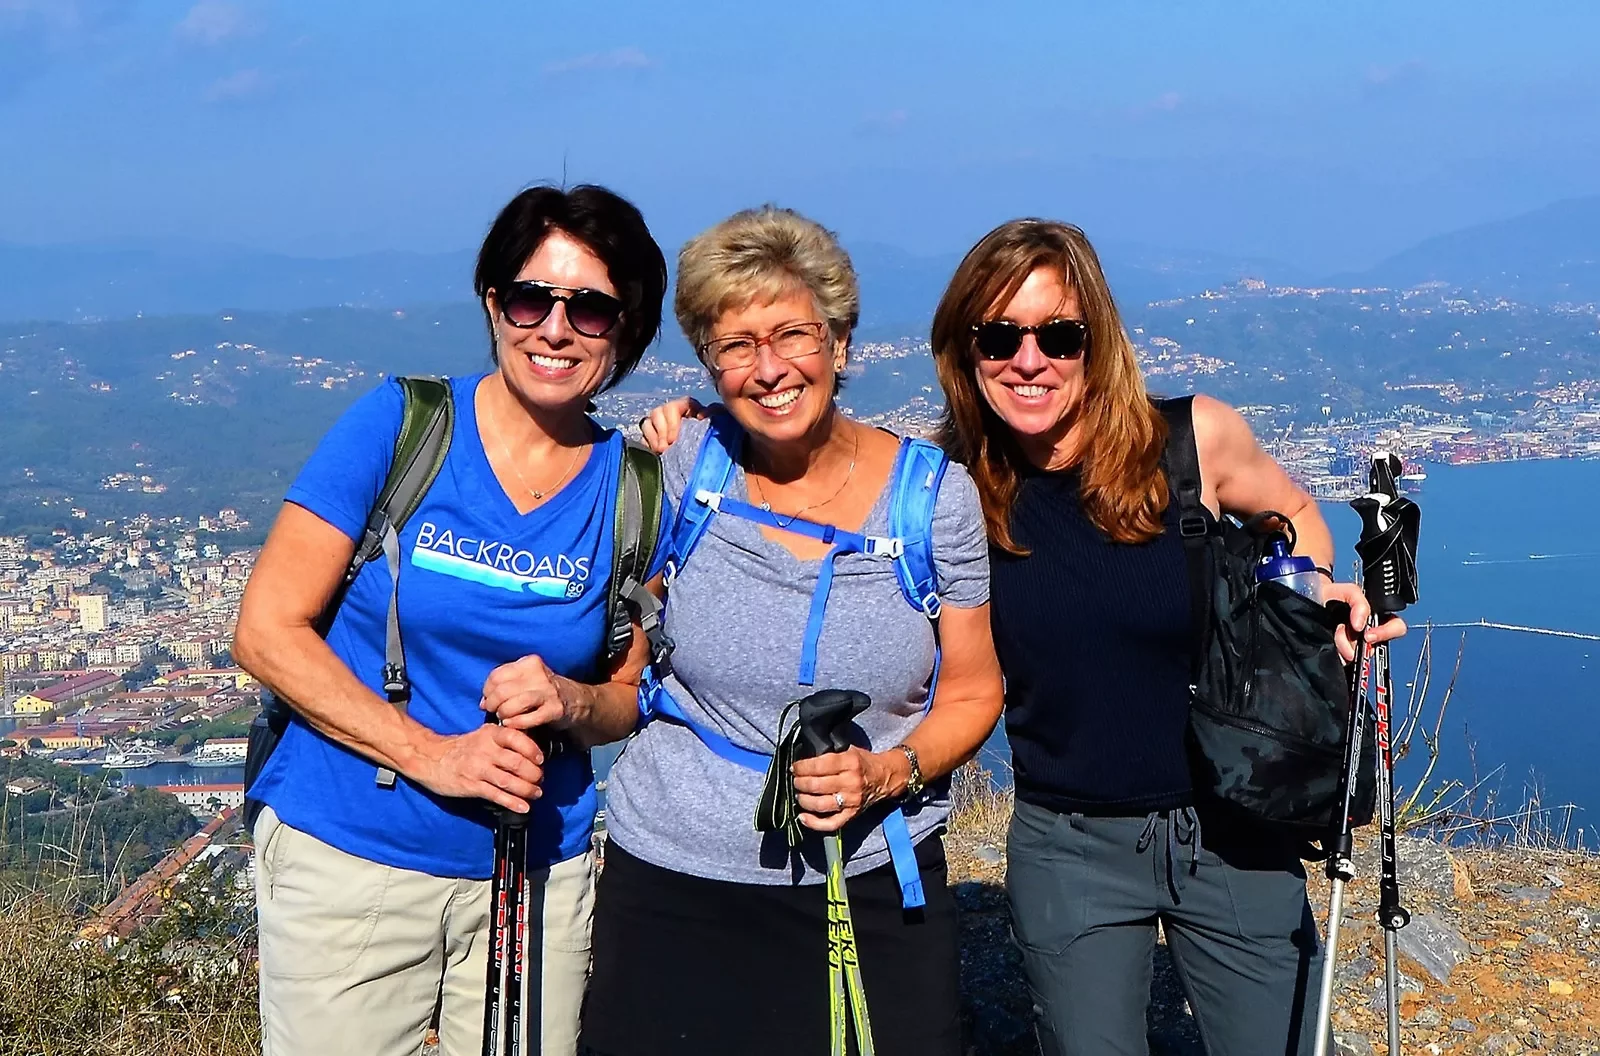 Three women posing together with Italian landscape behind them.